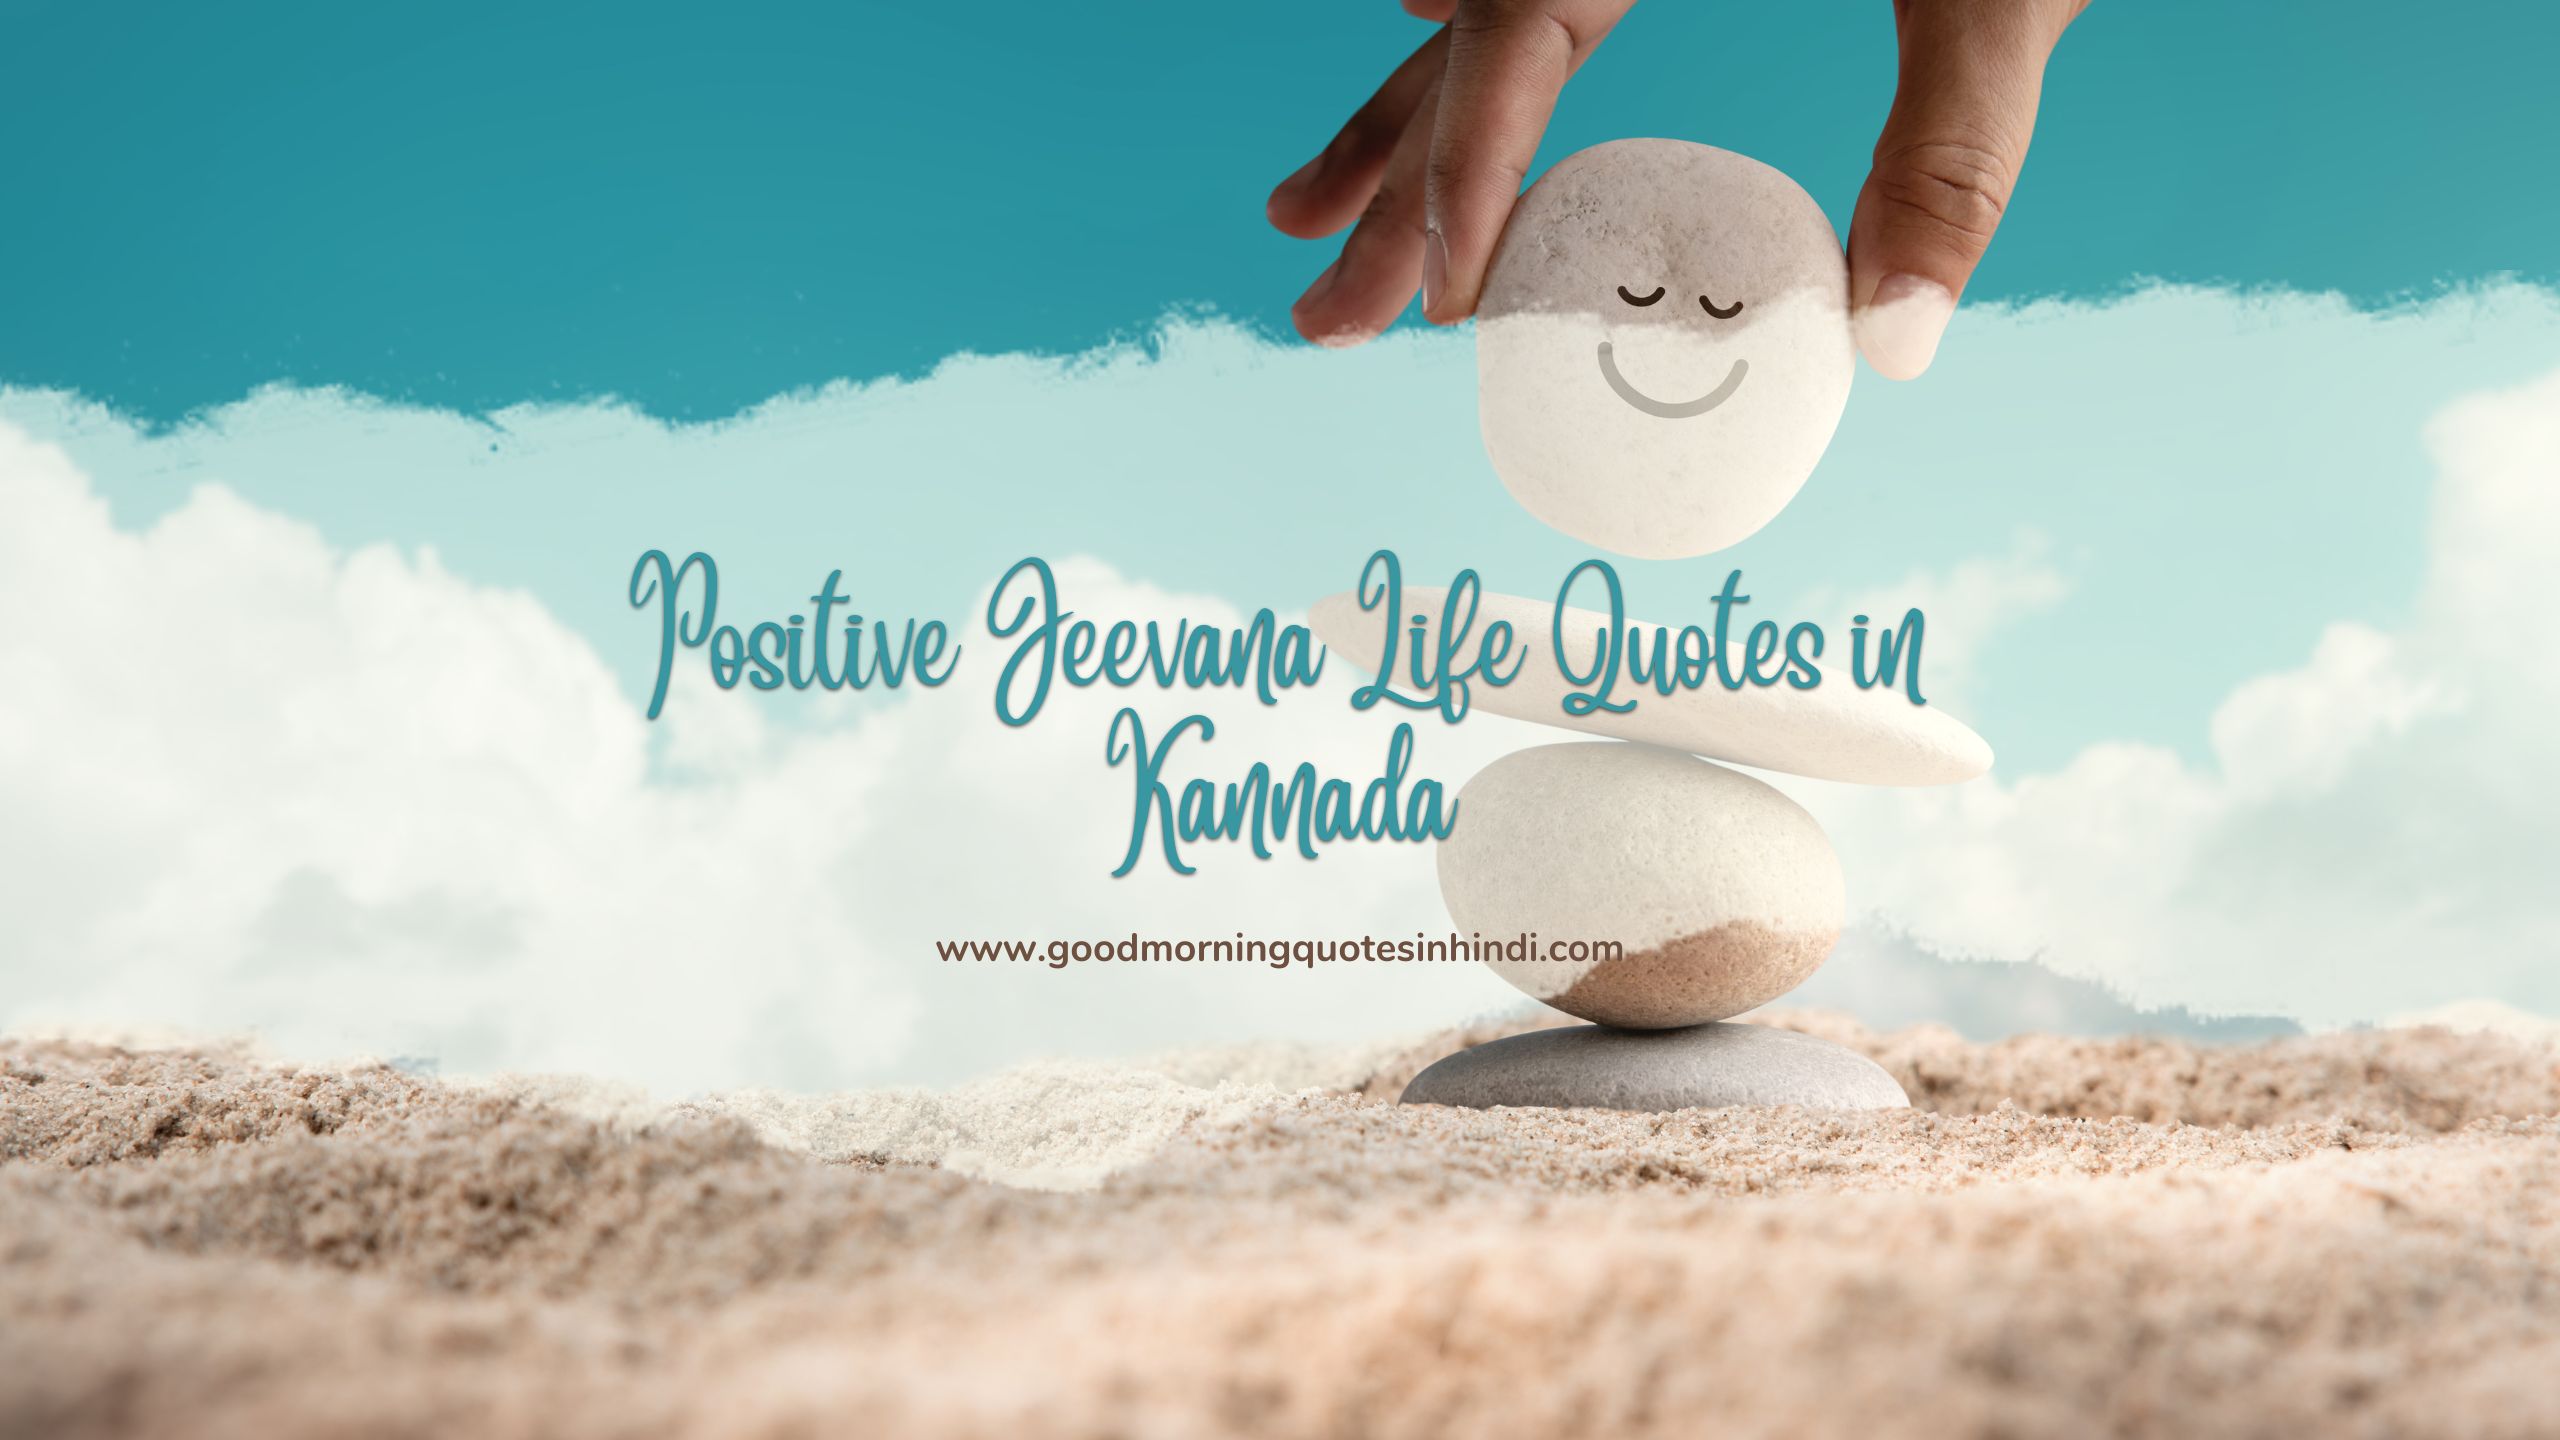 Positive Jeevana Life Quotes in Kannada1